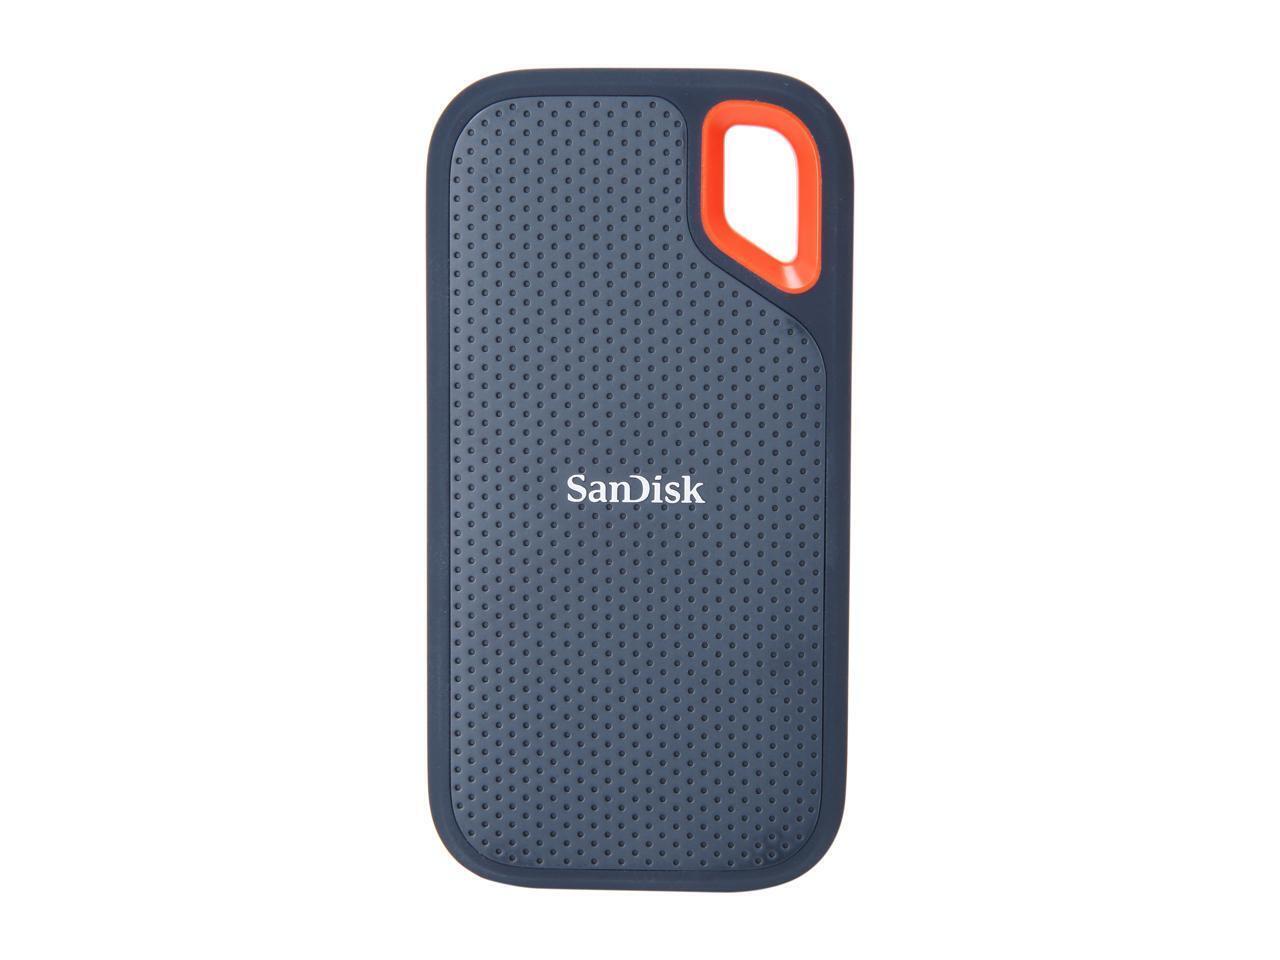 arc Imprisonment have confidence SanDisk 500GB Extreme Portable External SSD - Up to 550 MB/s - USB-C, USB  3.1 | eBay